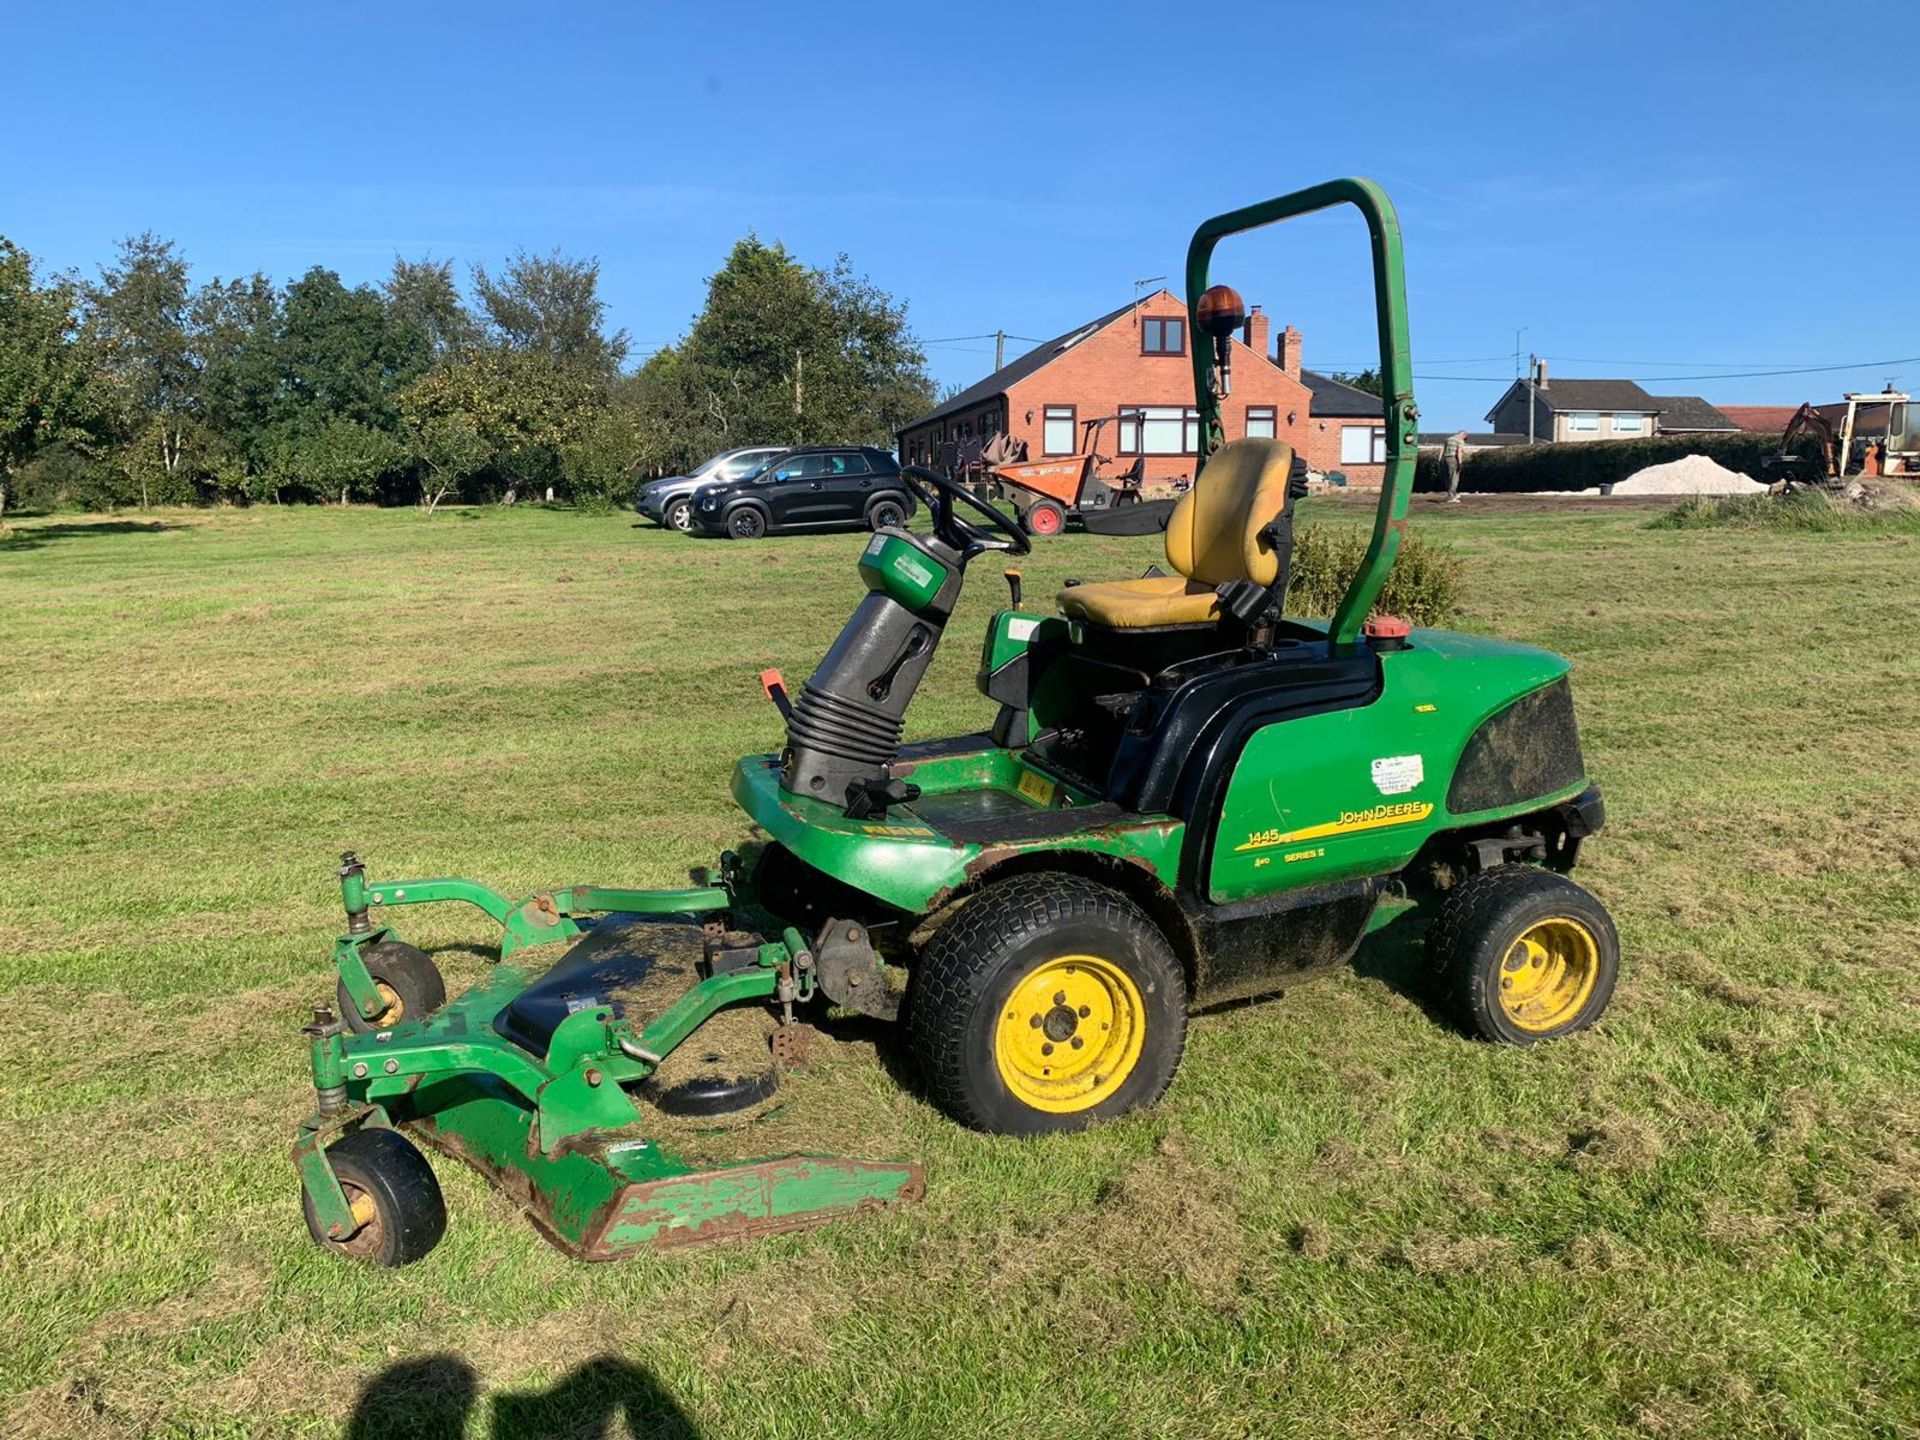 JOHN DEERE 1445 SERIES II 4WD RIDE ON DIESEL LAWN MOWER C/W OUT-FRONT ROTARY CUTTING DECK *PLUS VAT* - Image 6 of 14